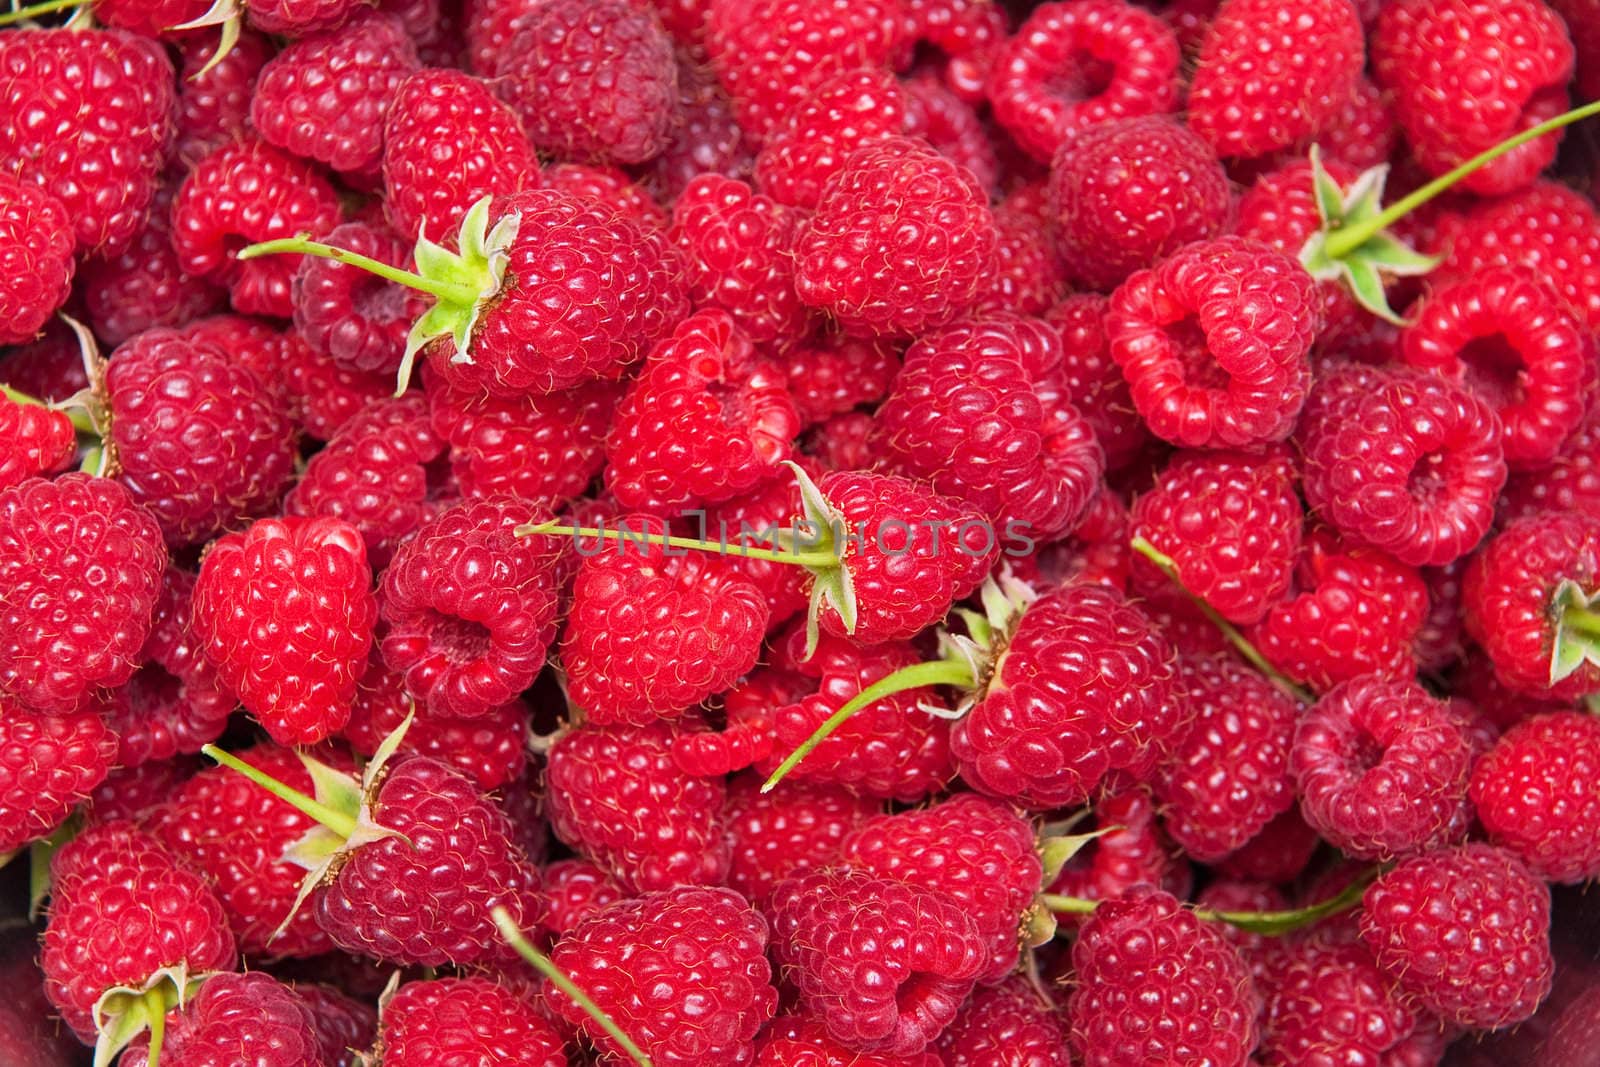 An abstract image of fresh raspberries